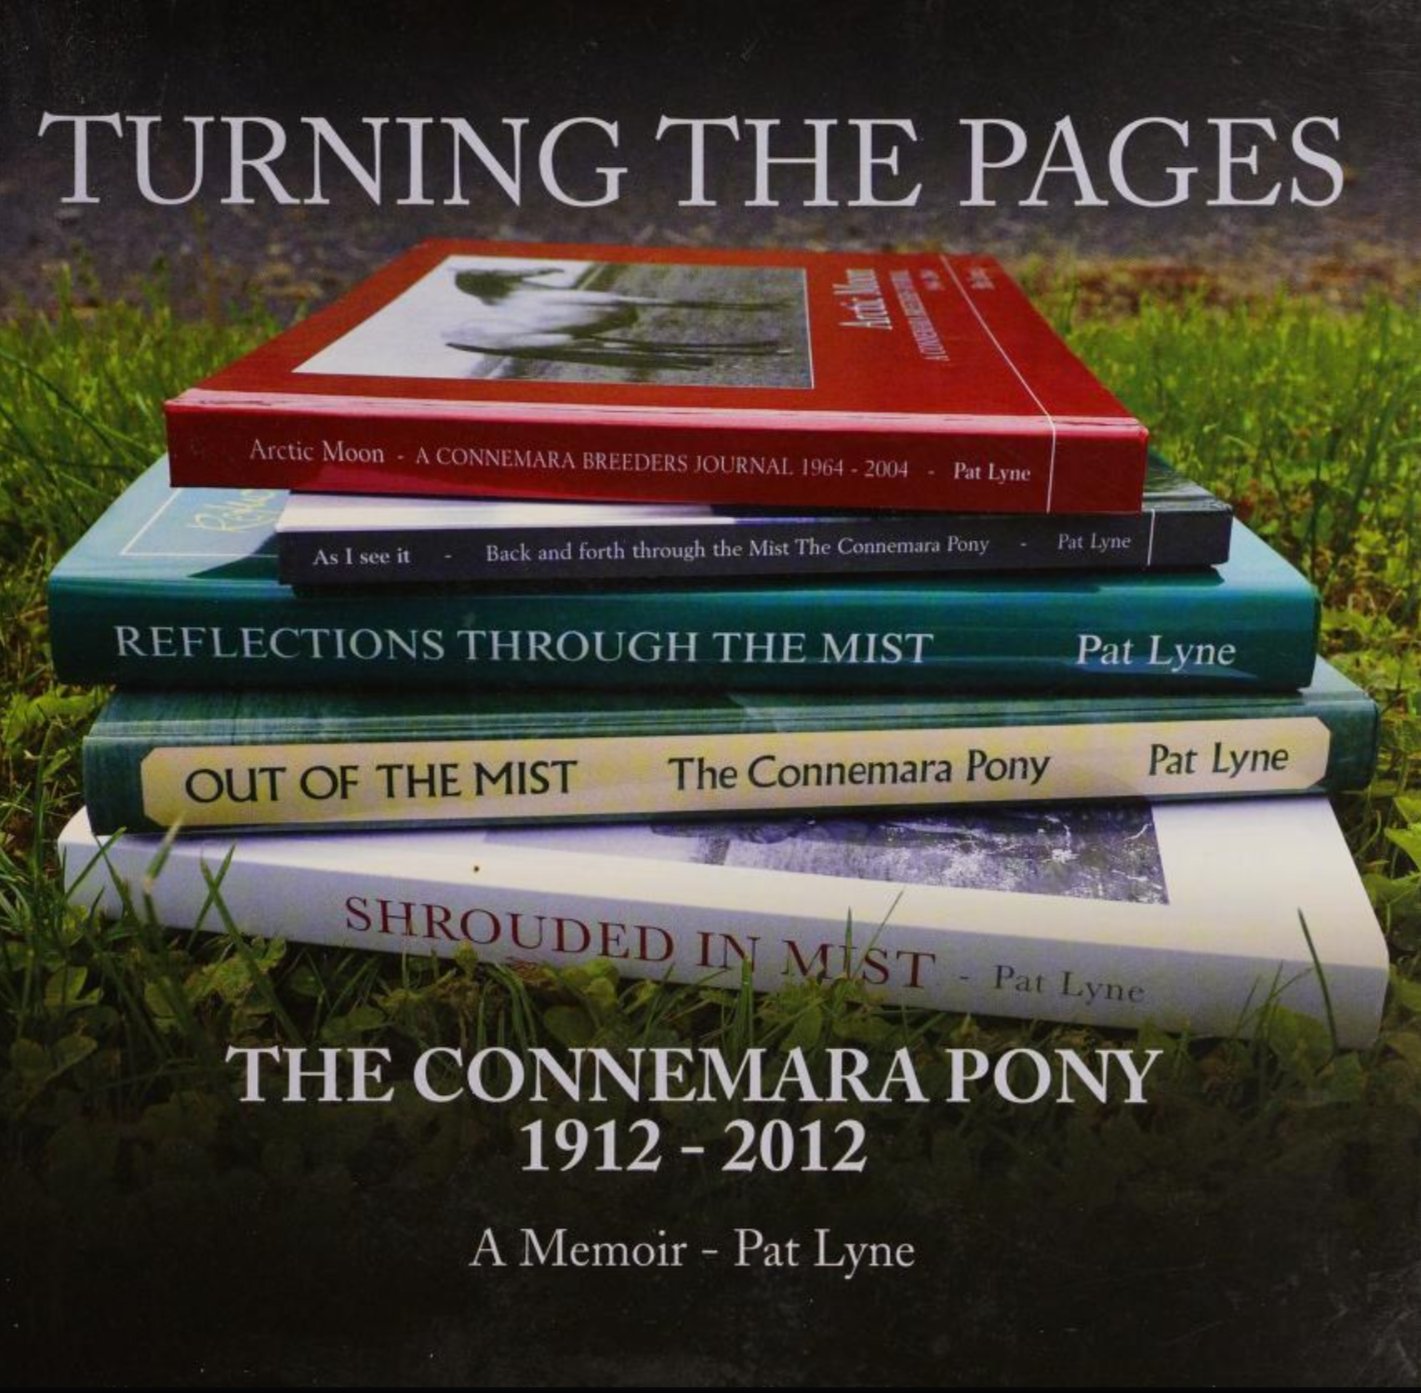 ACPS digital library book Turning the Pages A Memoirby Pat Lyne